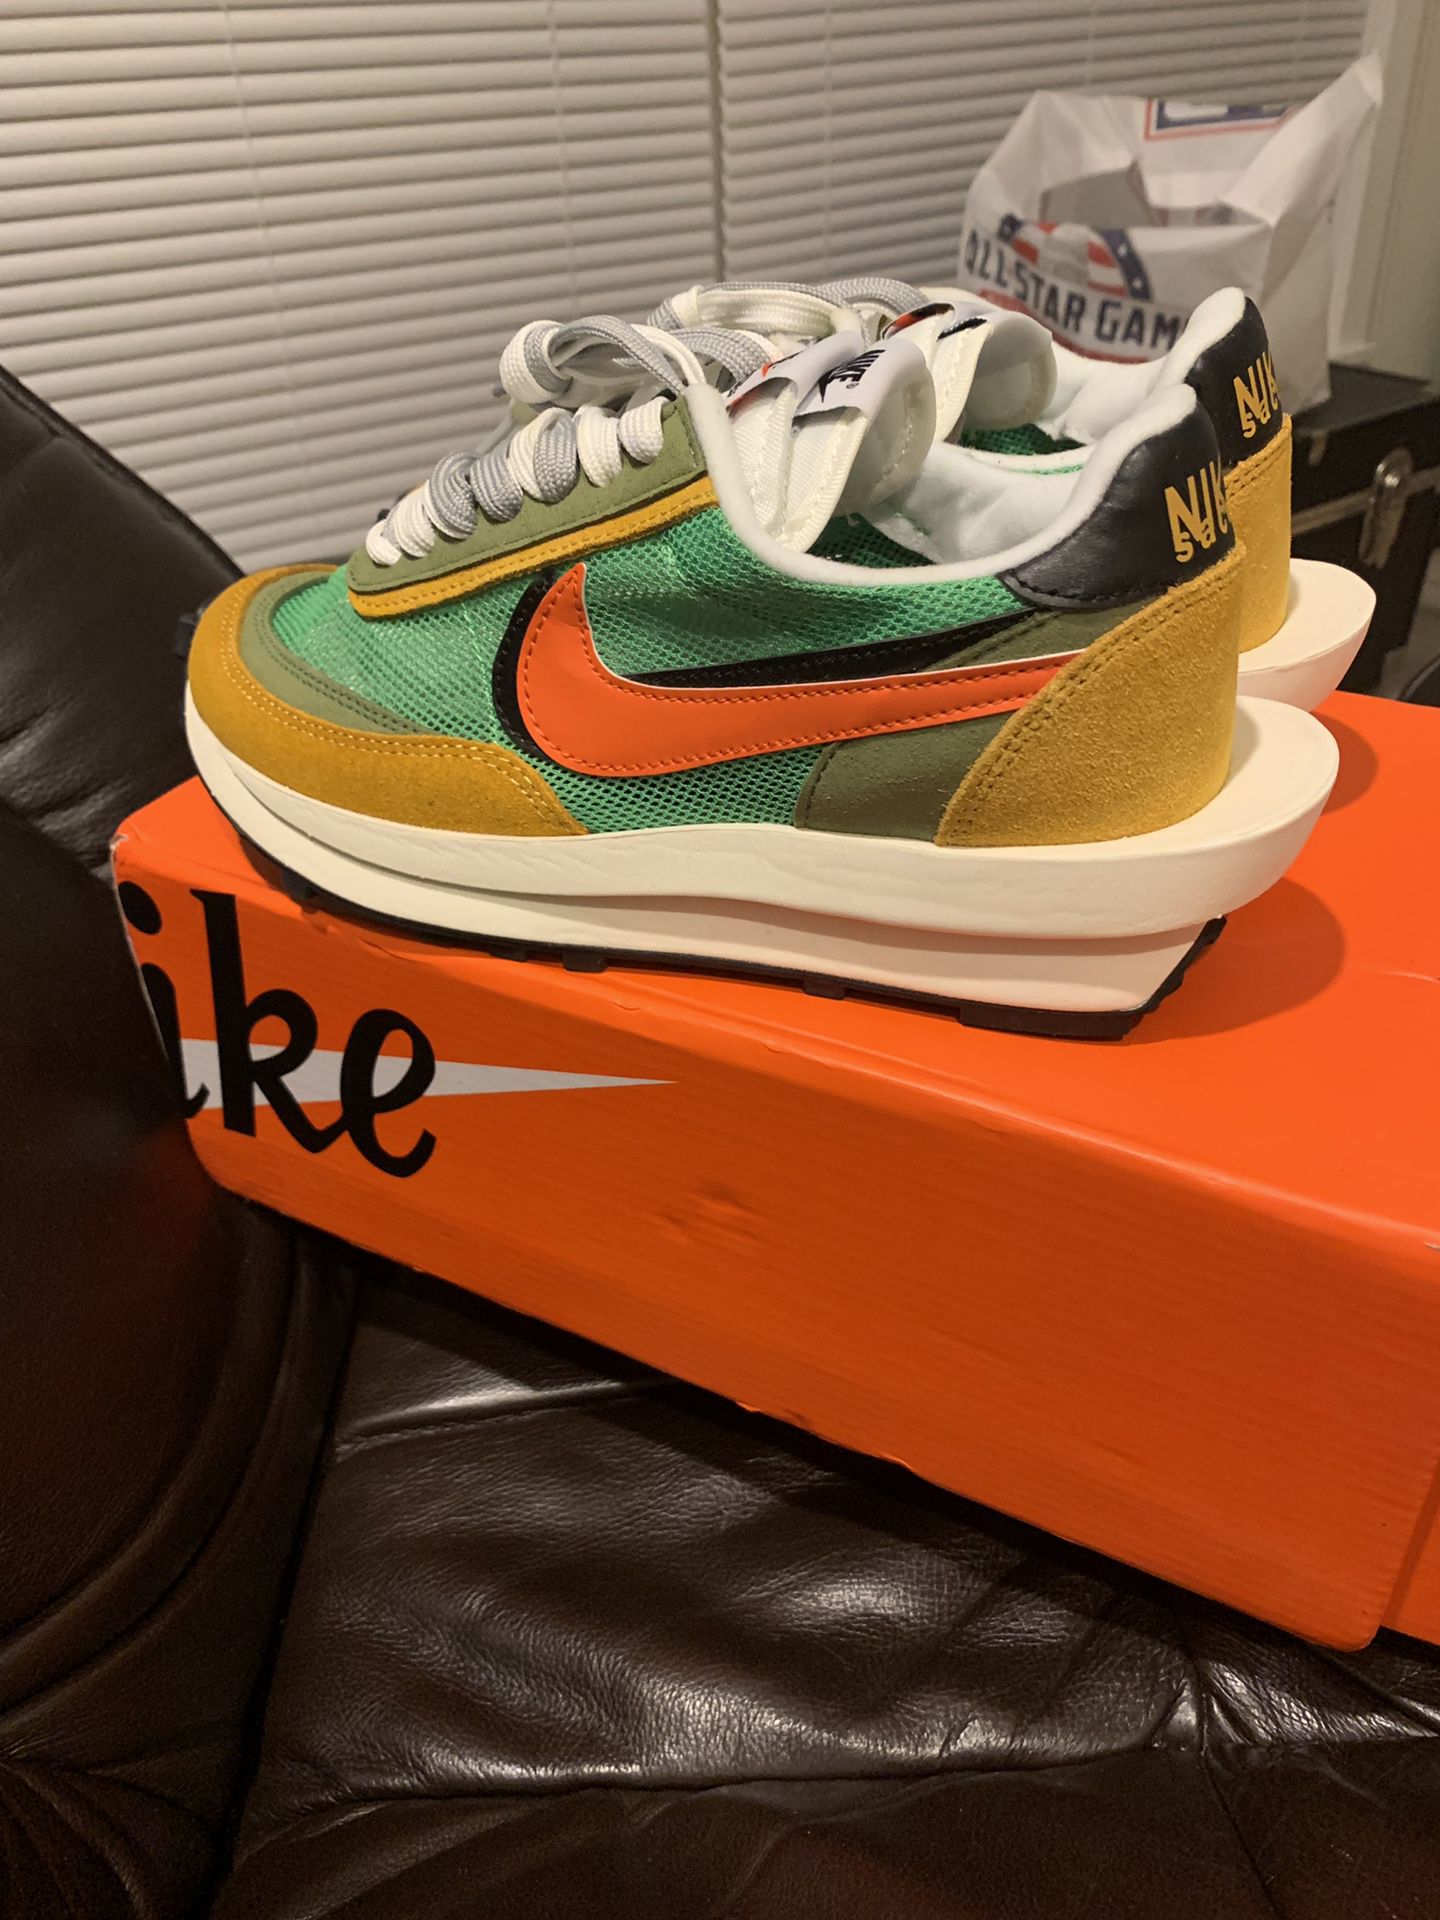 Sacai Nike Authentic. Women’s size 7.5/8. Men size 6. Worn once, asking $250. No trades!!!!!